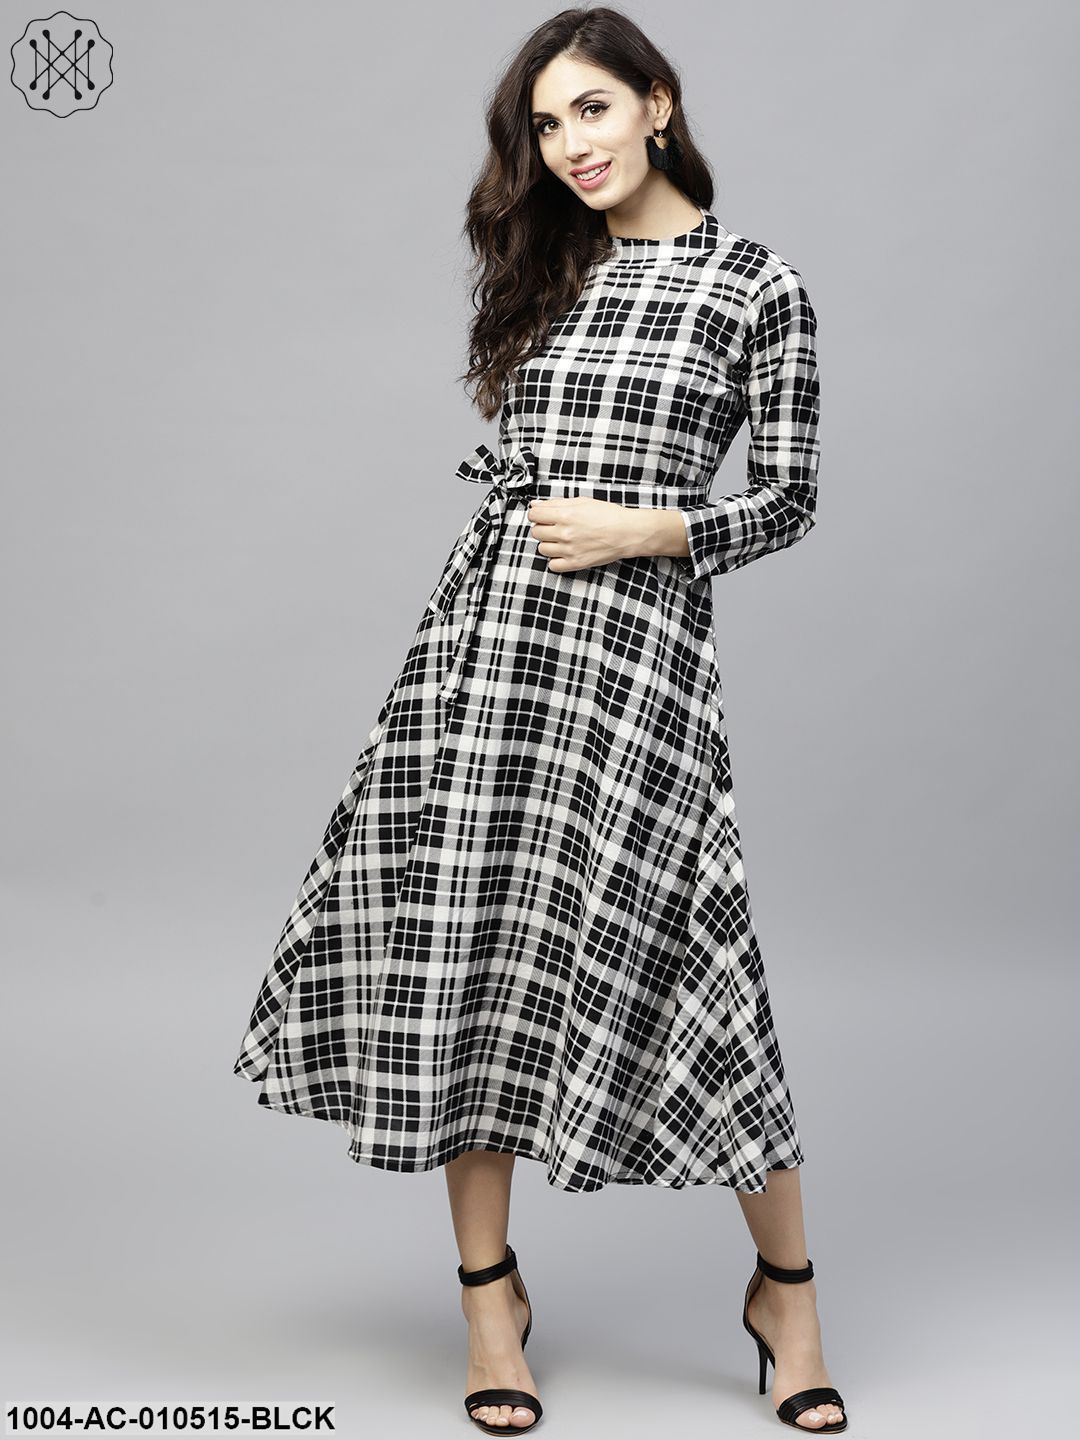 Black & White Checked Dress With Roll Collar And 3/4 Sleeves